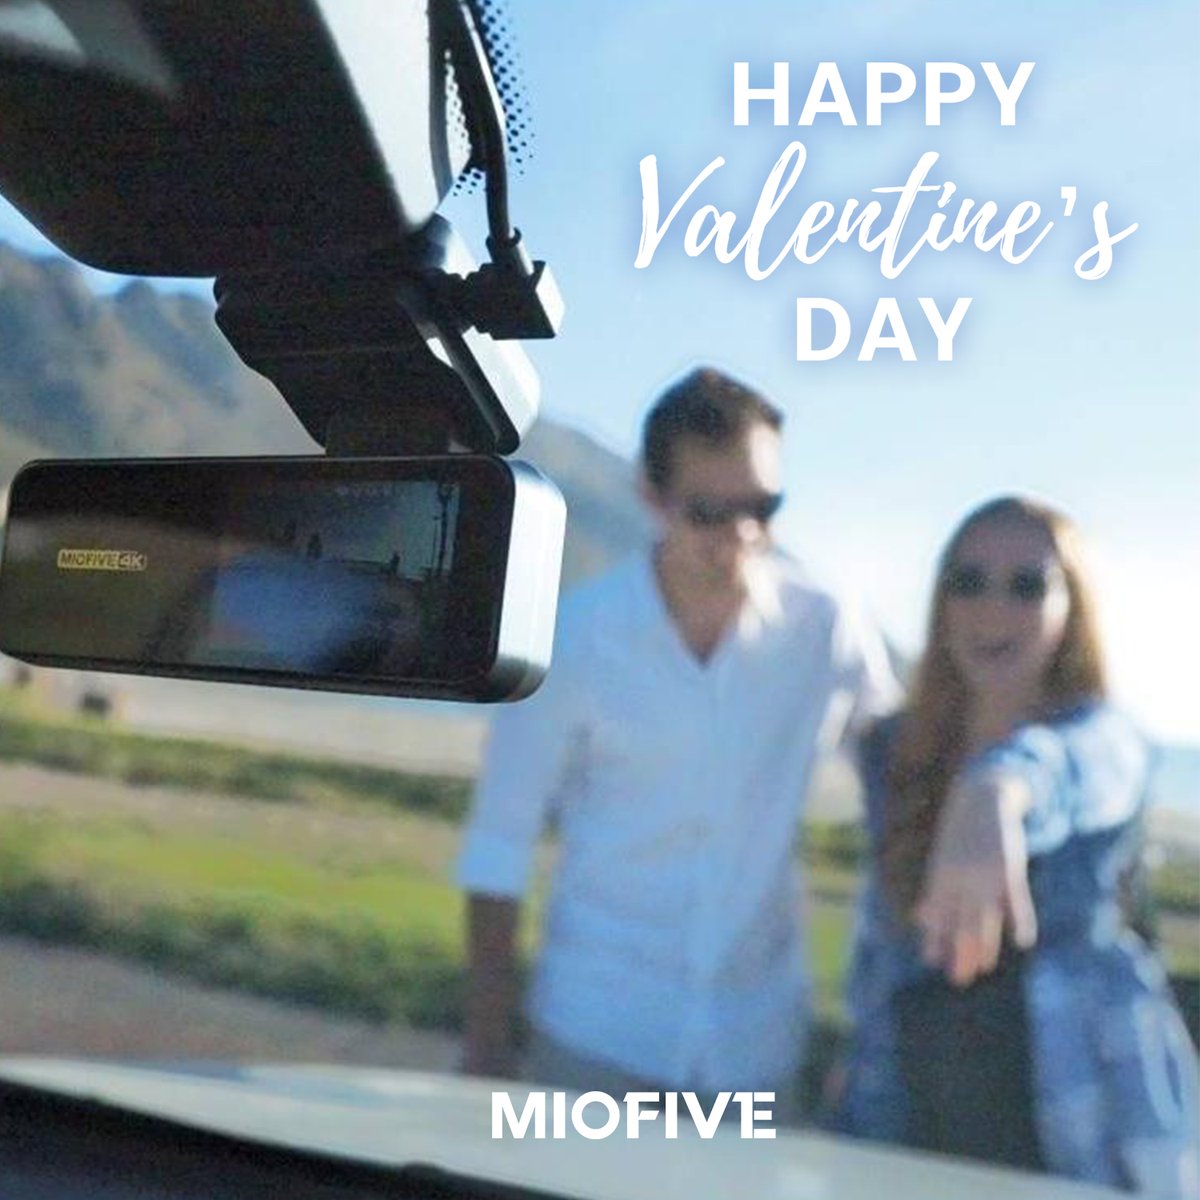 🌹Happy Valentine's Day 💕🌟 💖 Wishing all of you a day filled with love, laughter, and safe travels. Here's to capturing every precious moment on the road and in your hearts! 🚗❤️